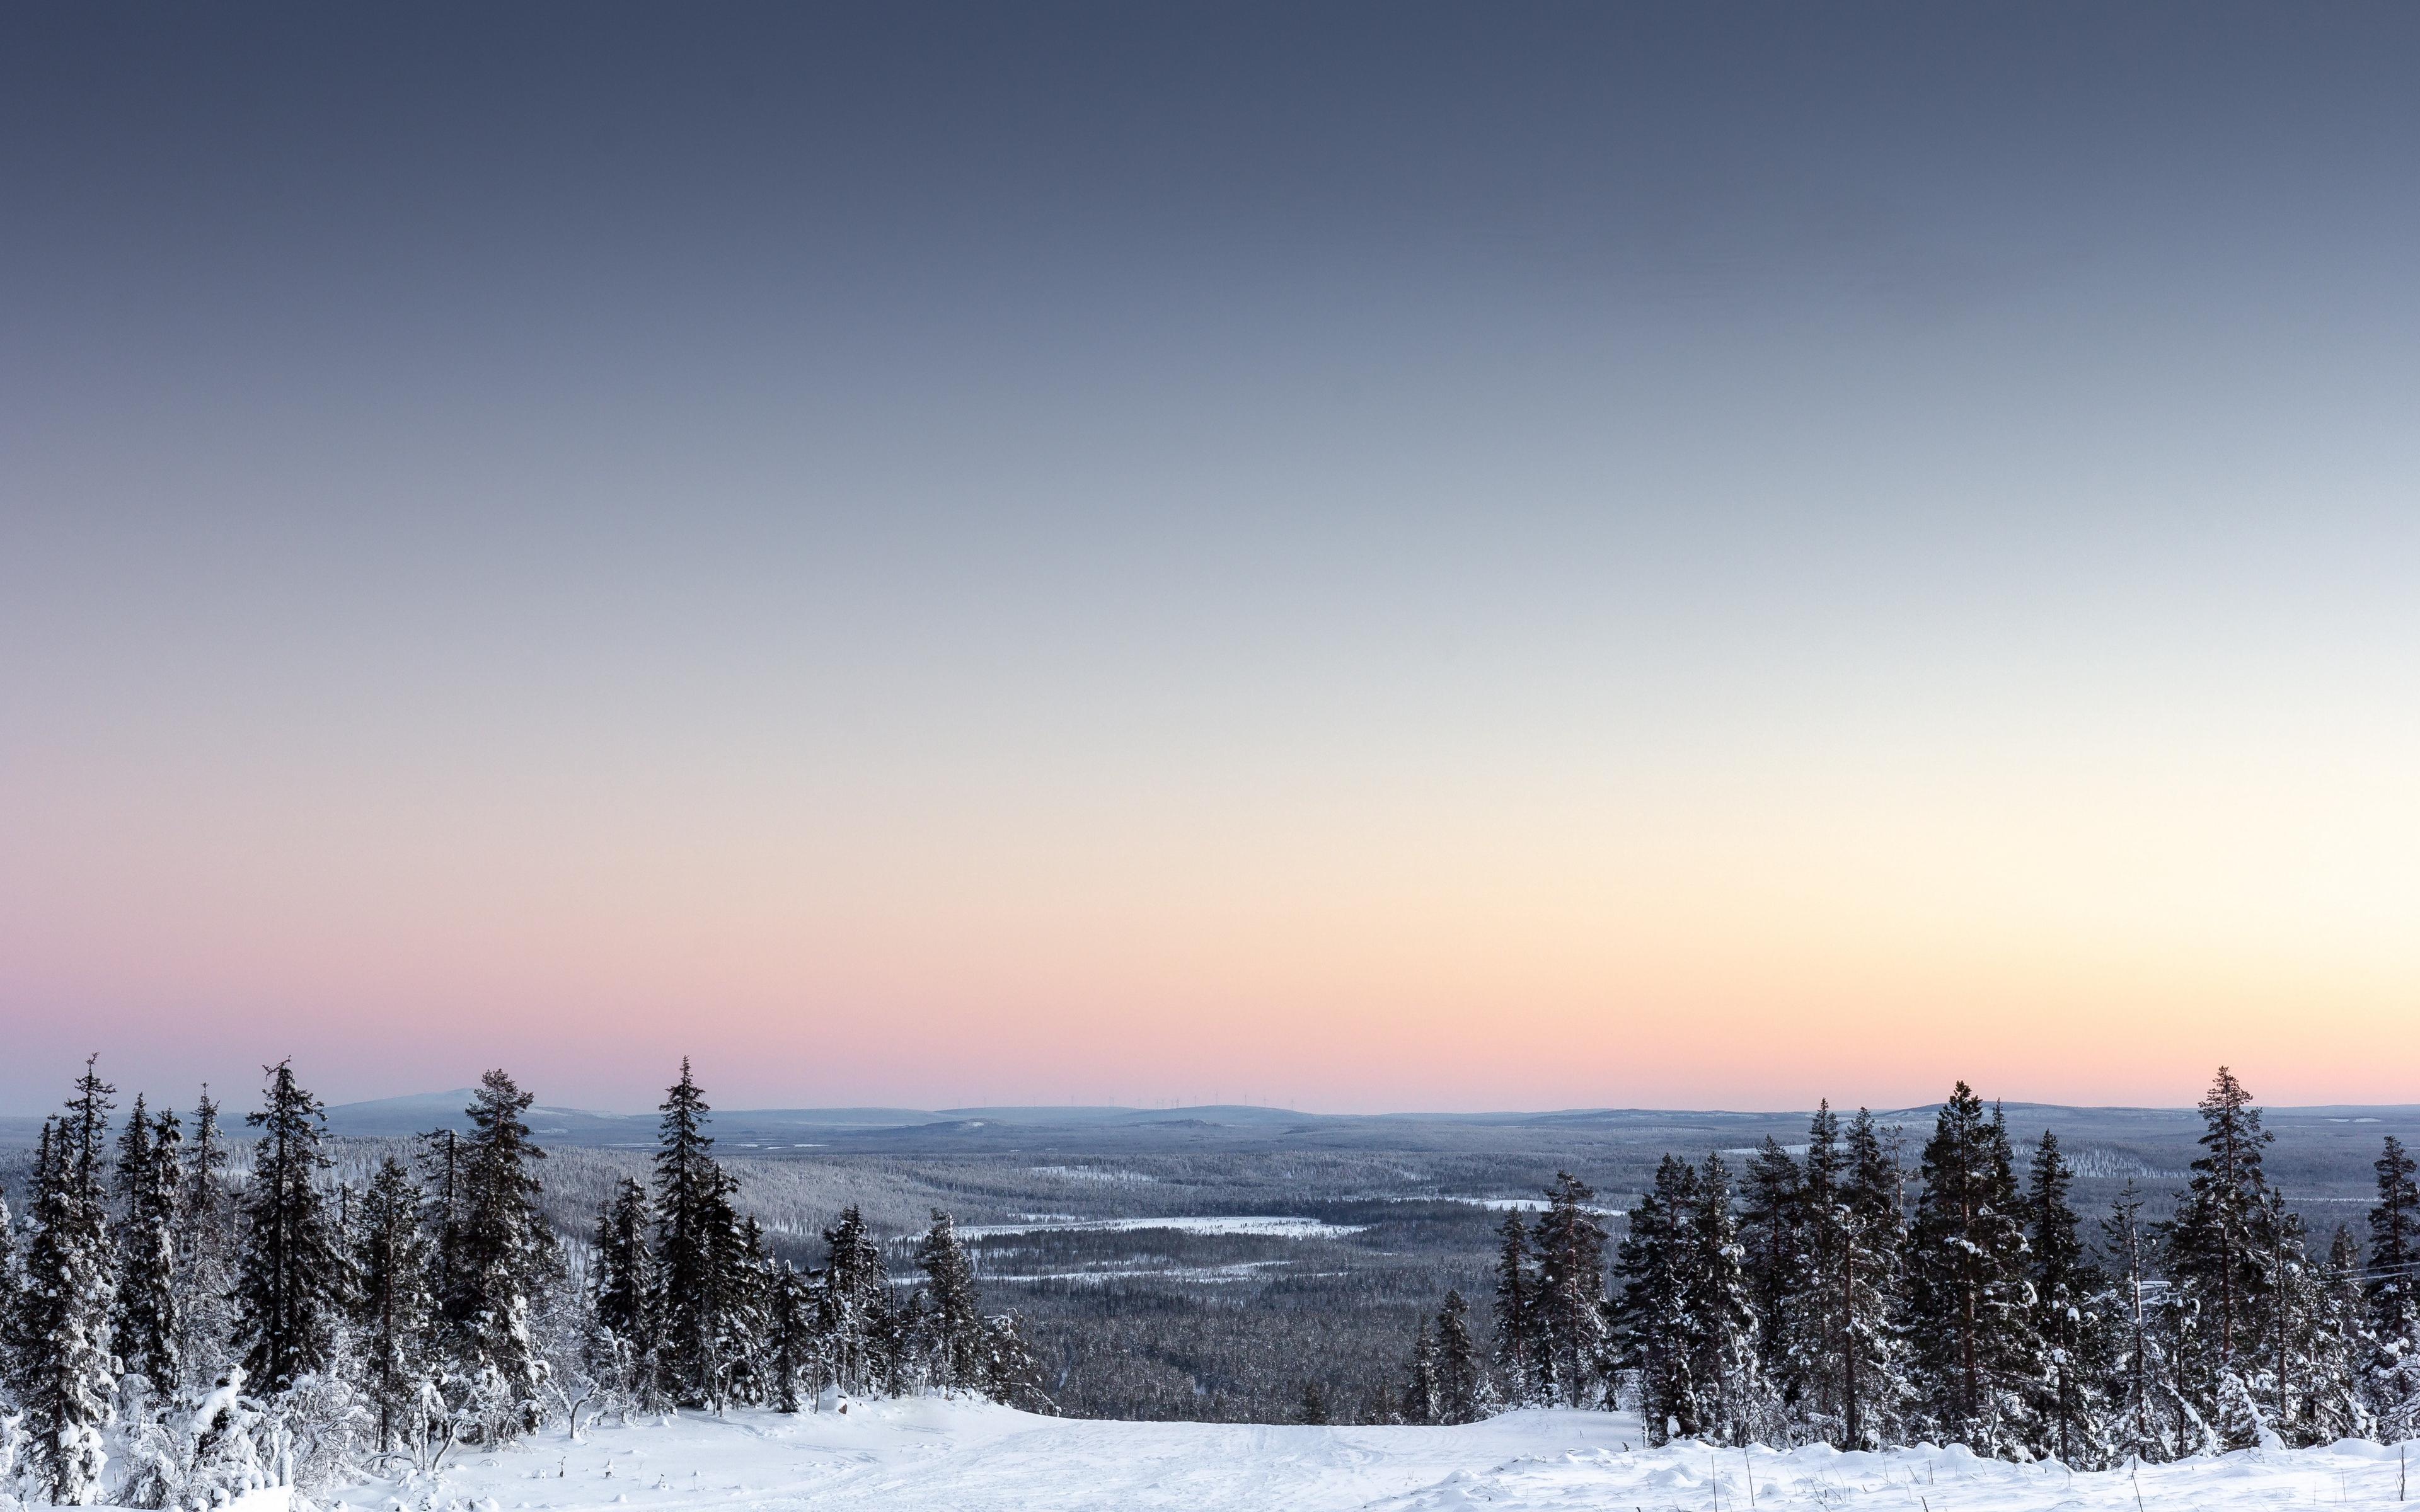 finland» 1080P, 2k, 4k HD wallpapers, backgrounds free download | Rare  Gallery